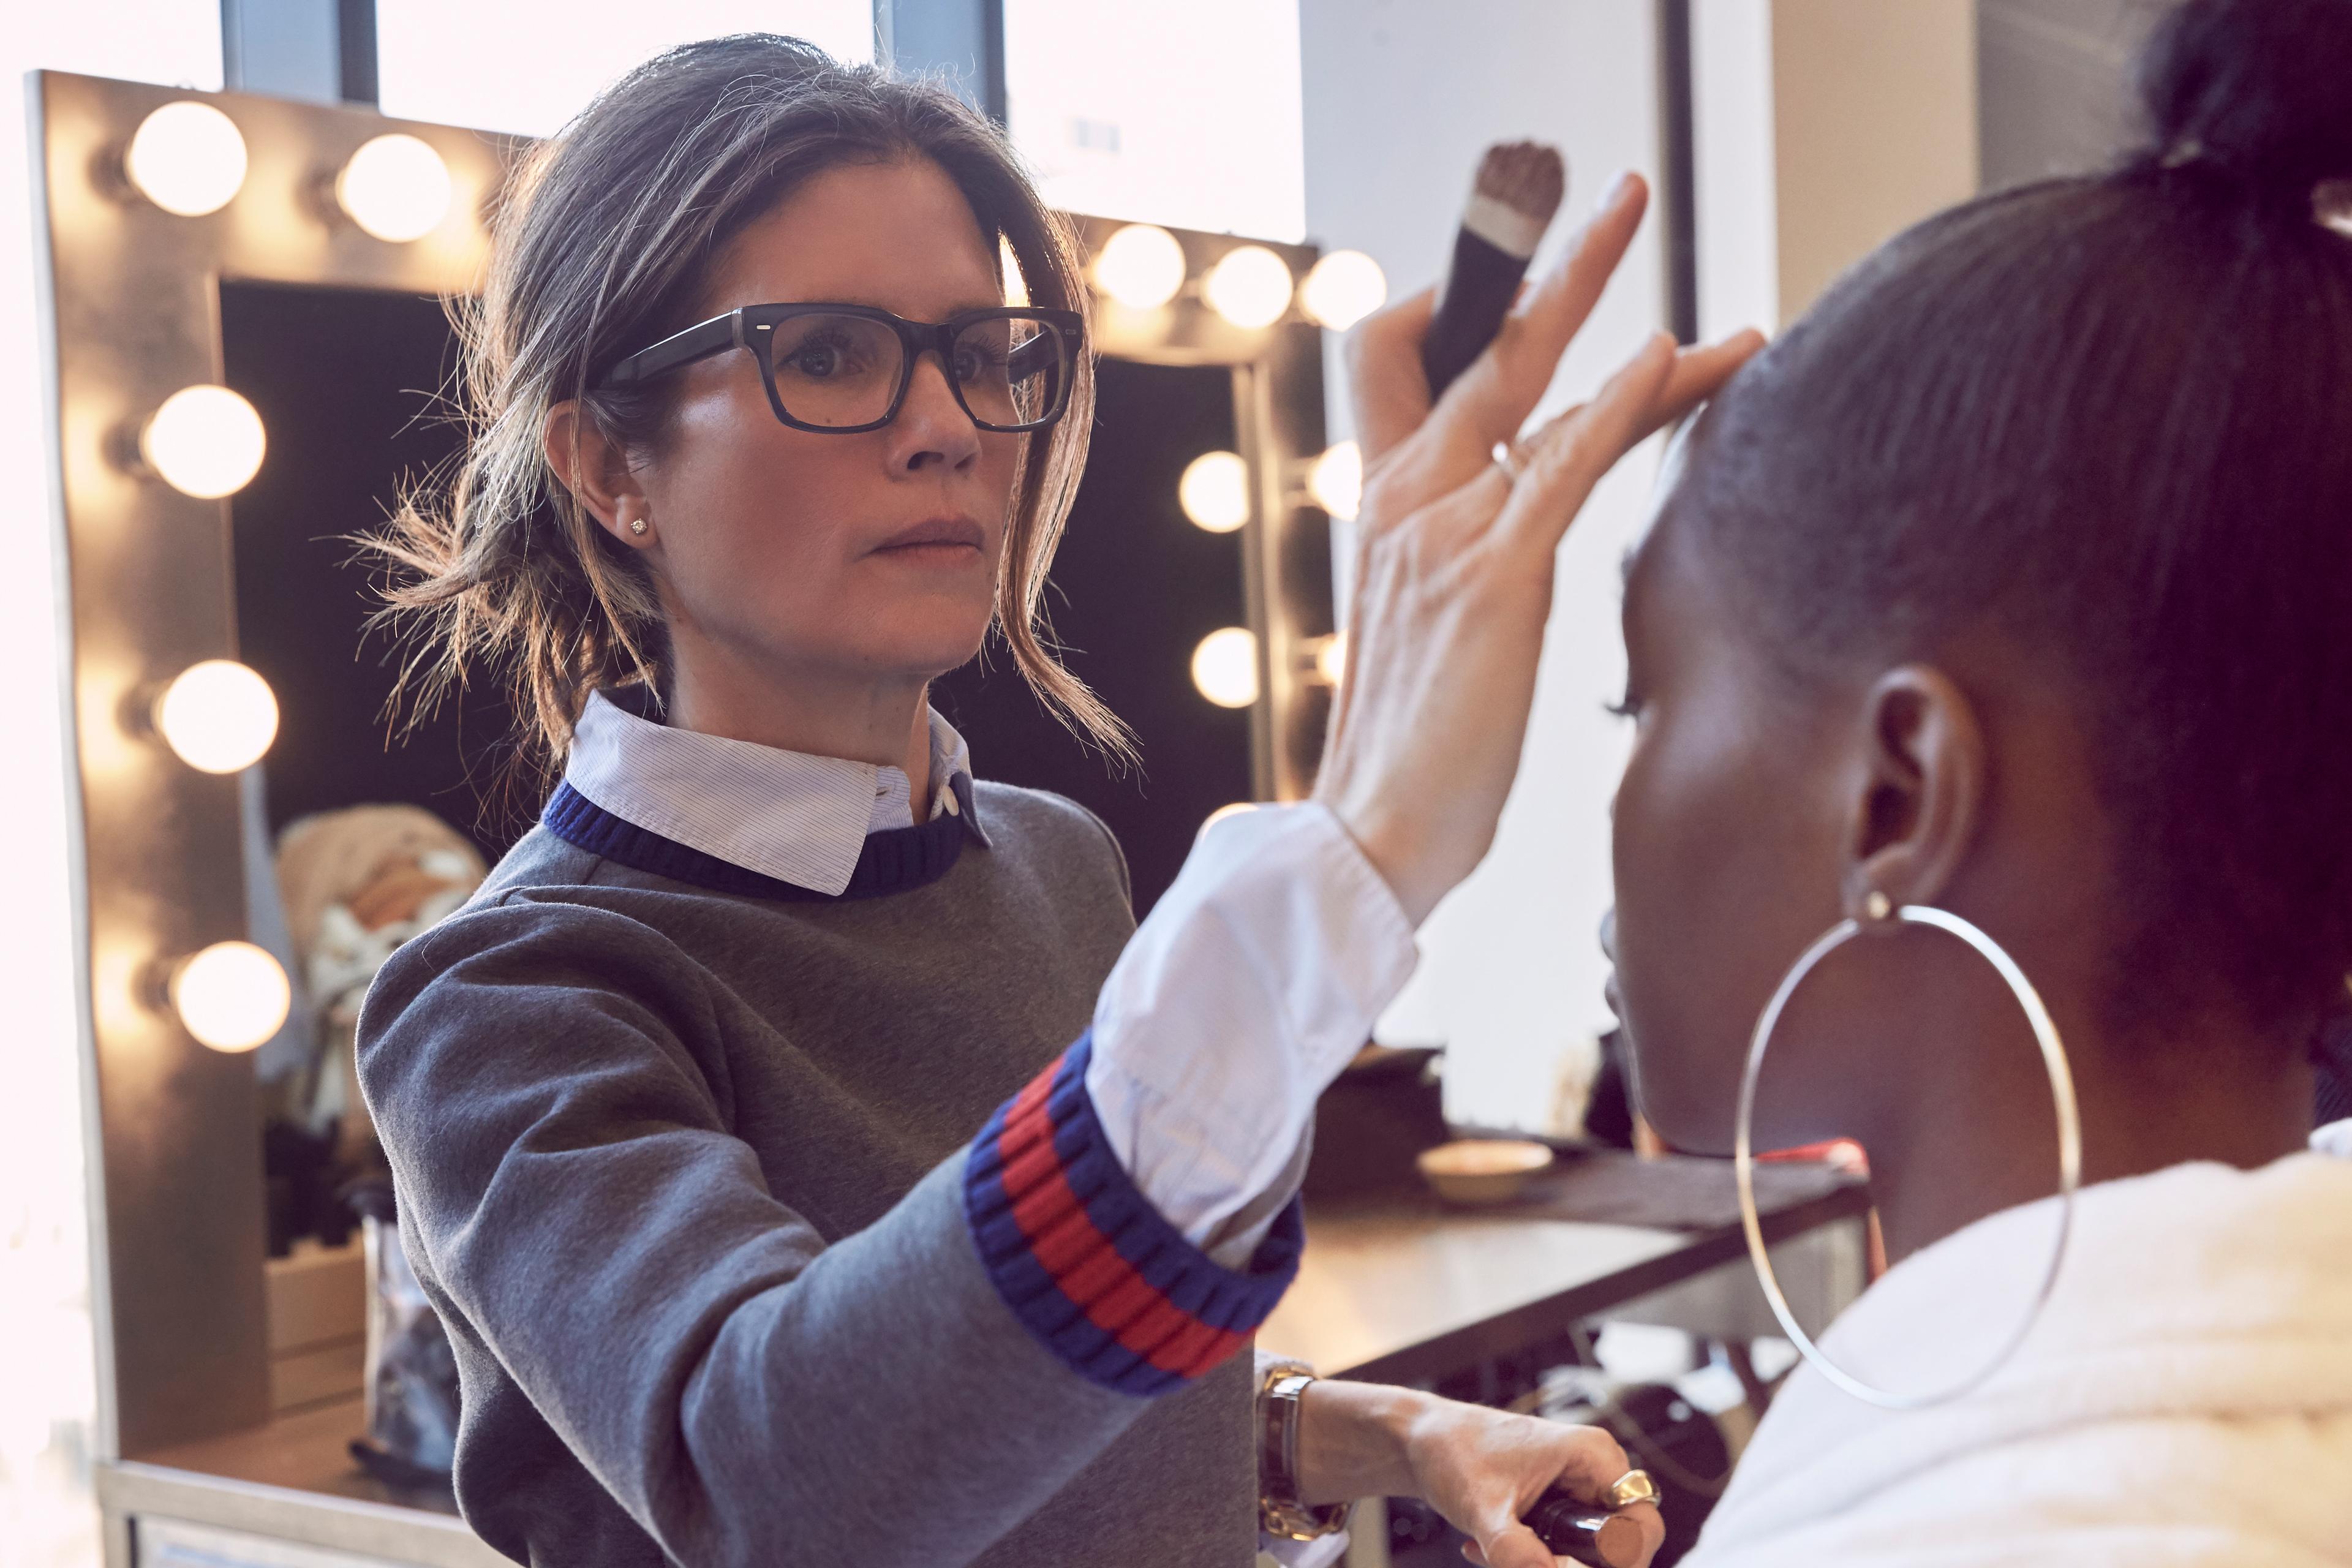 GUCCI WESTMAN APPLYING MAKEUP TO MODEL